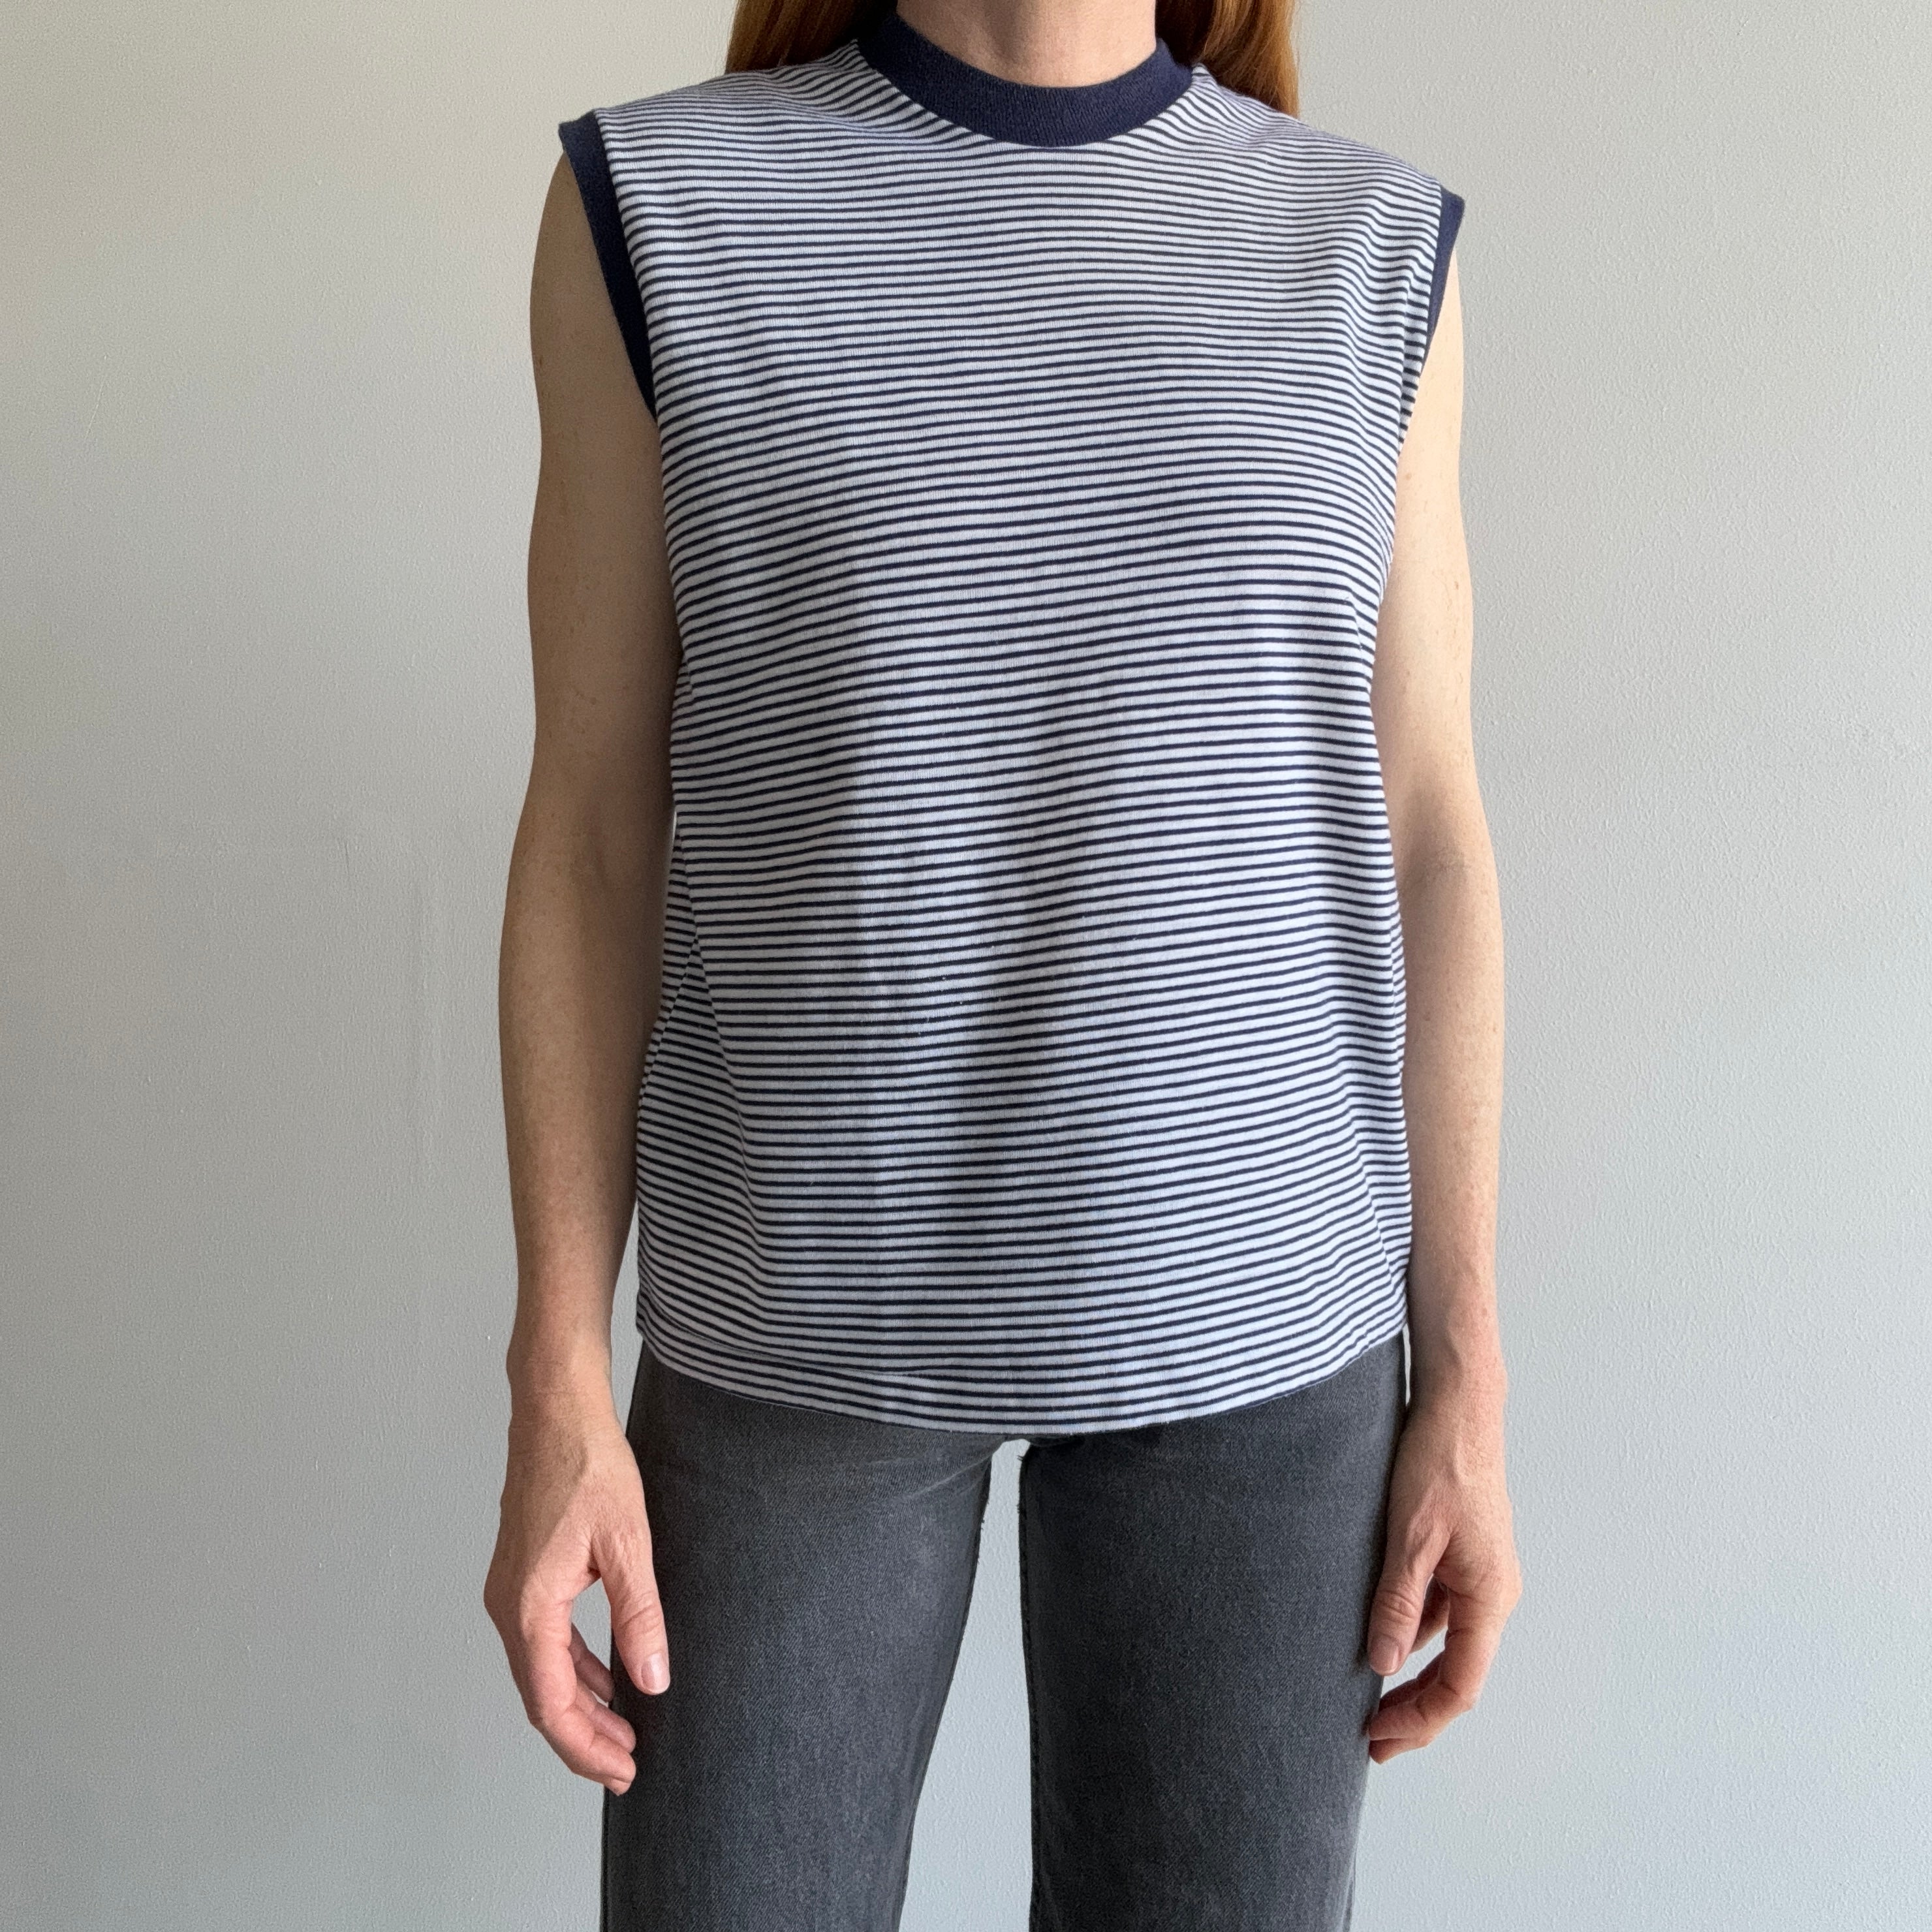 1970/80 Navy and White Striped Cotton Muscle Tank Top